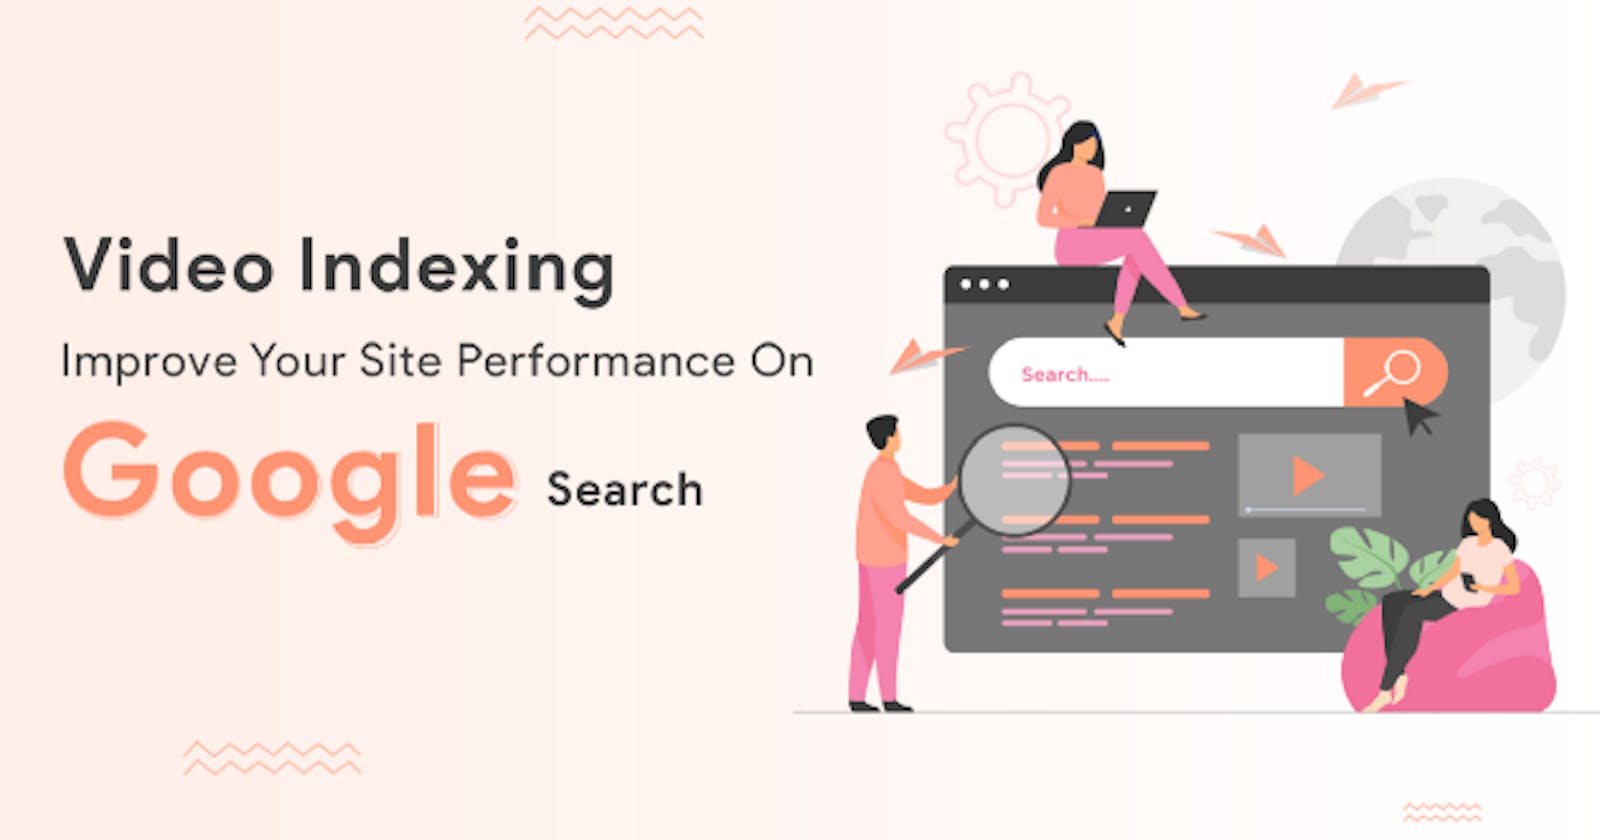 Video indexing: Improve your site performance on google search